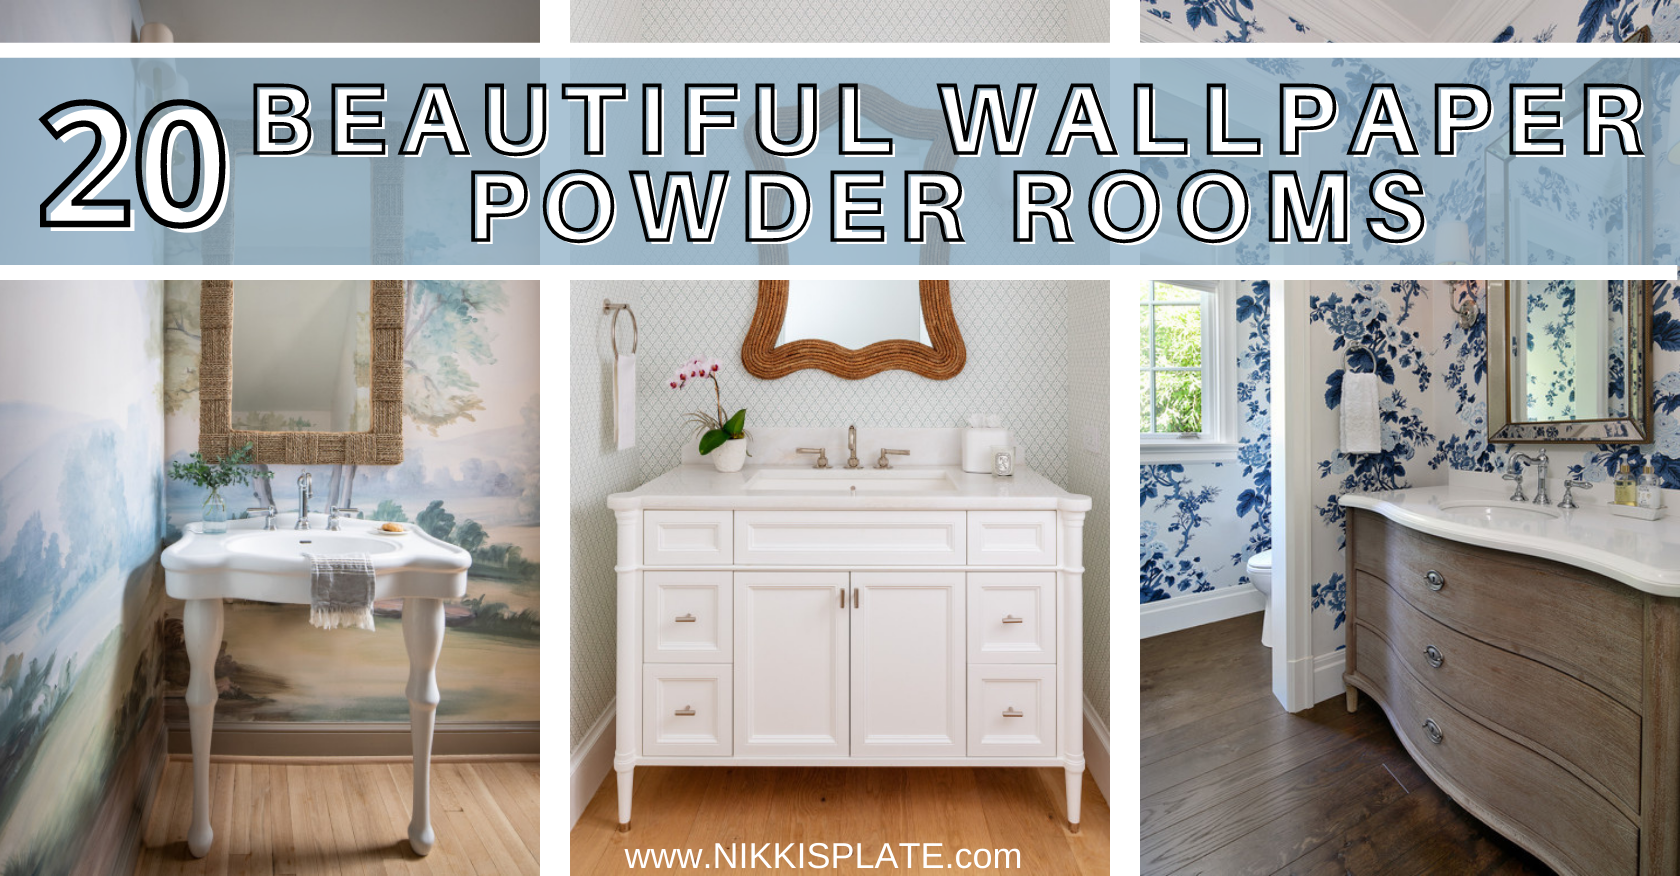 20 Beautiful Powder Rooms with Wallpaper - Nikki's Plate